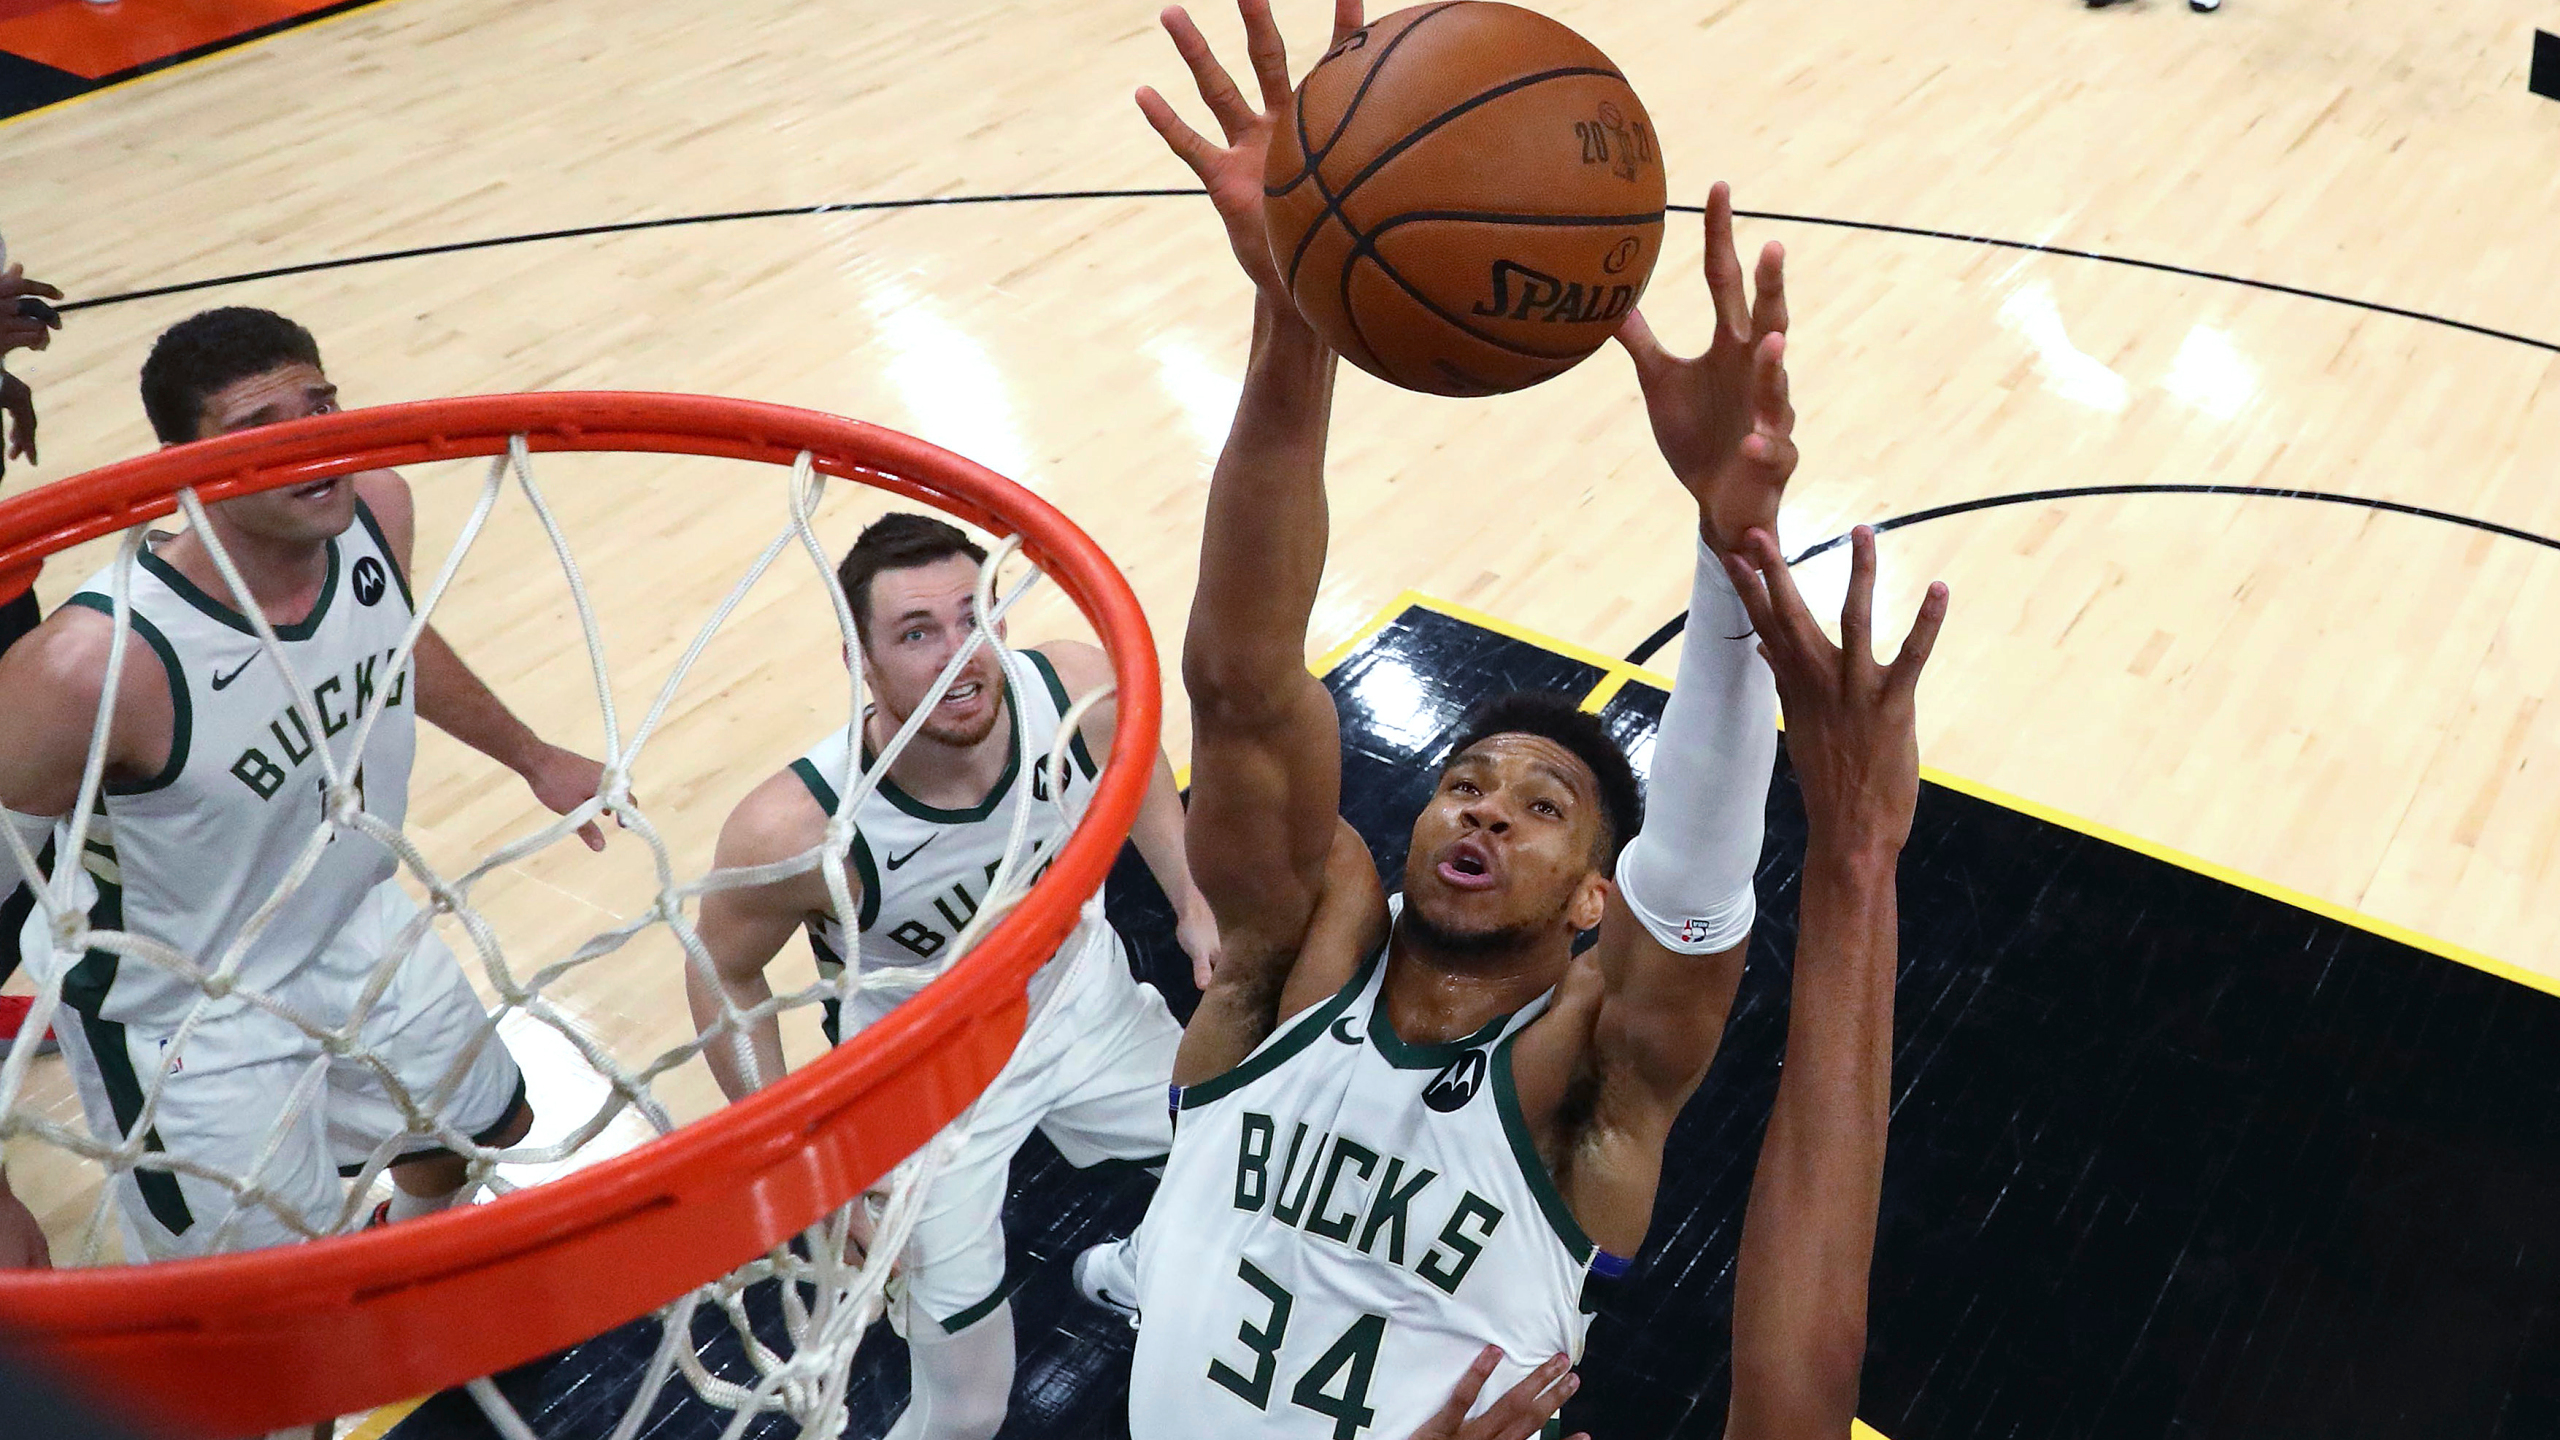 History awaits: Bucks try to focus with championship chance